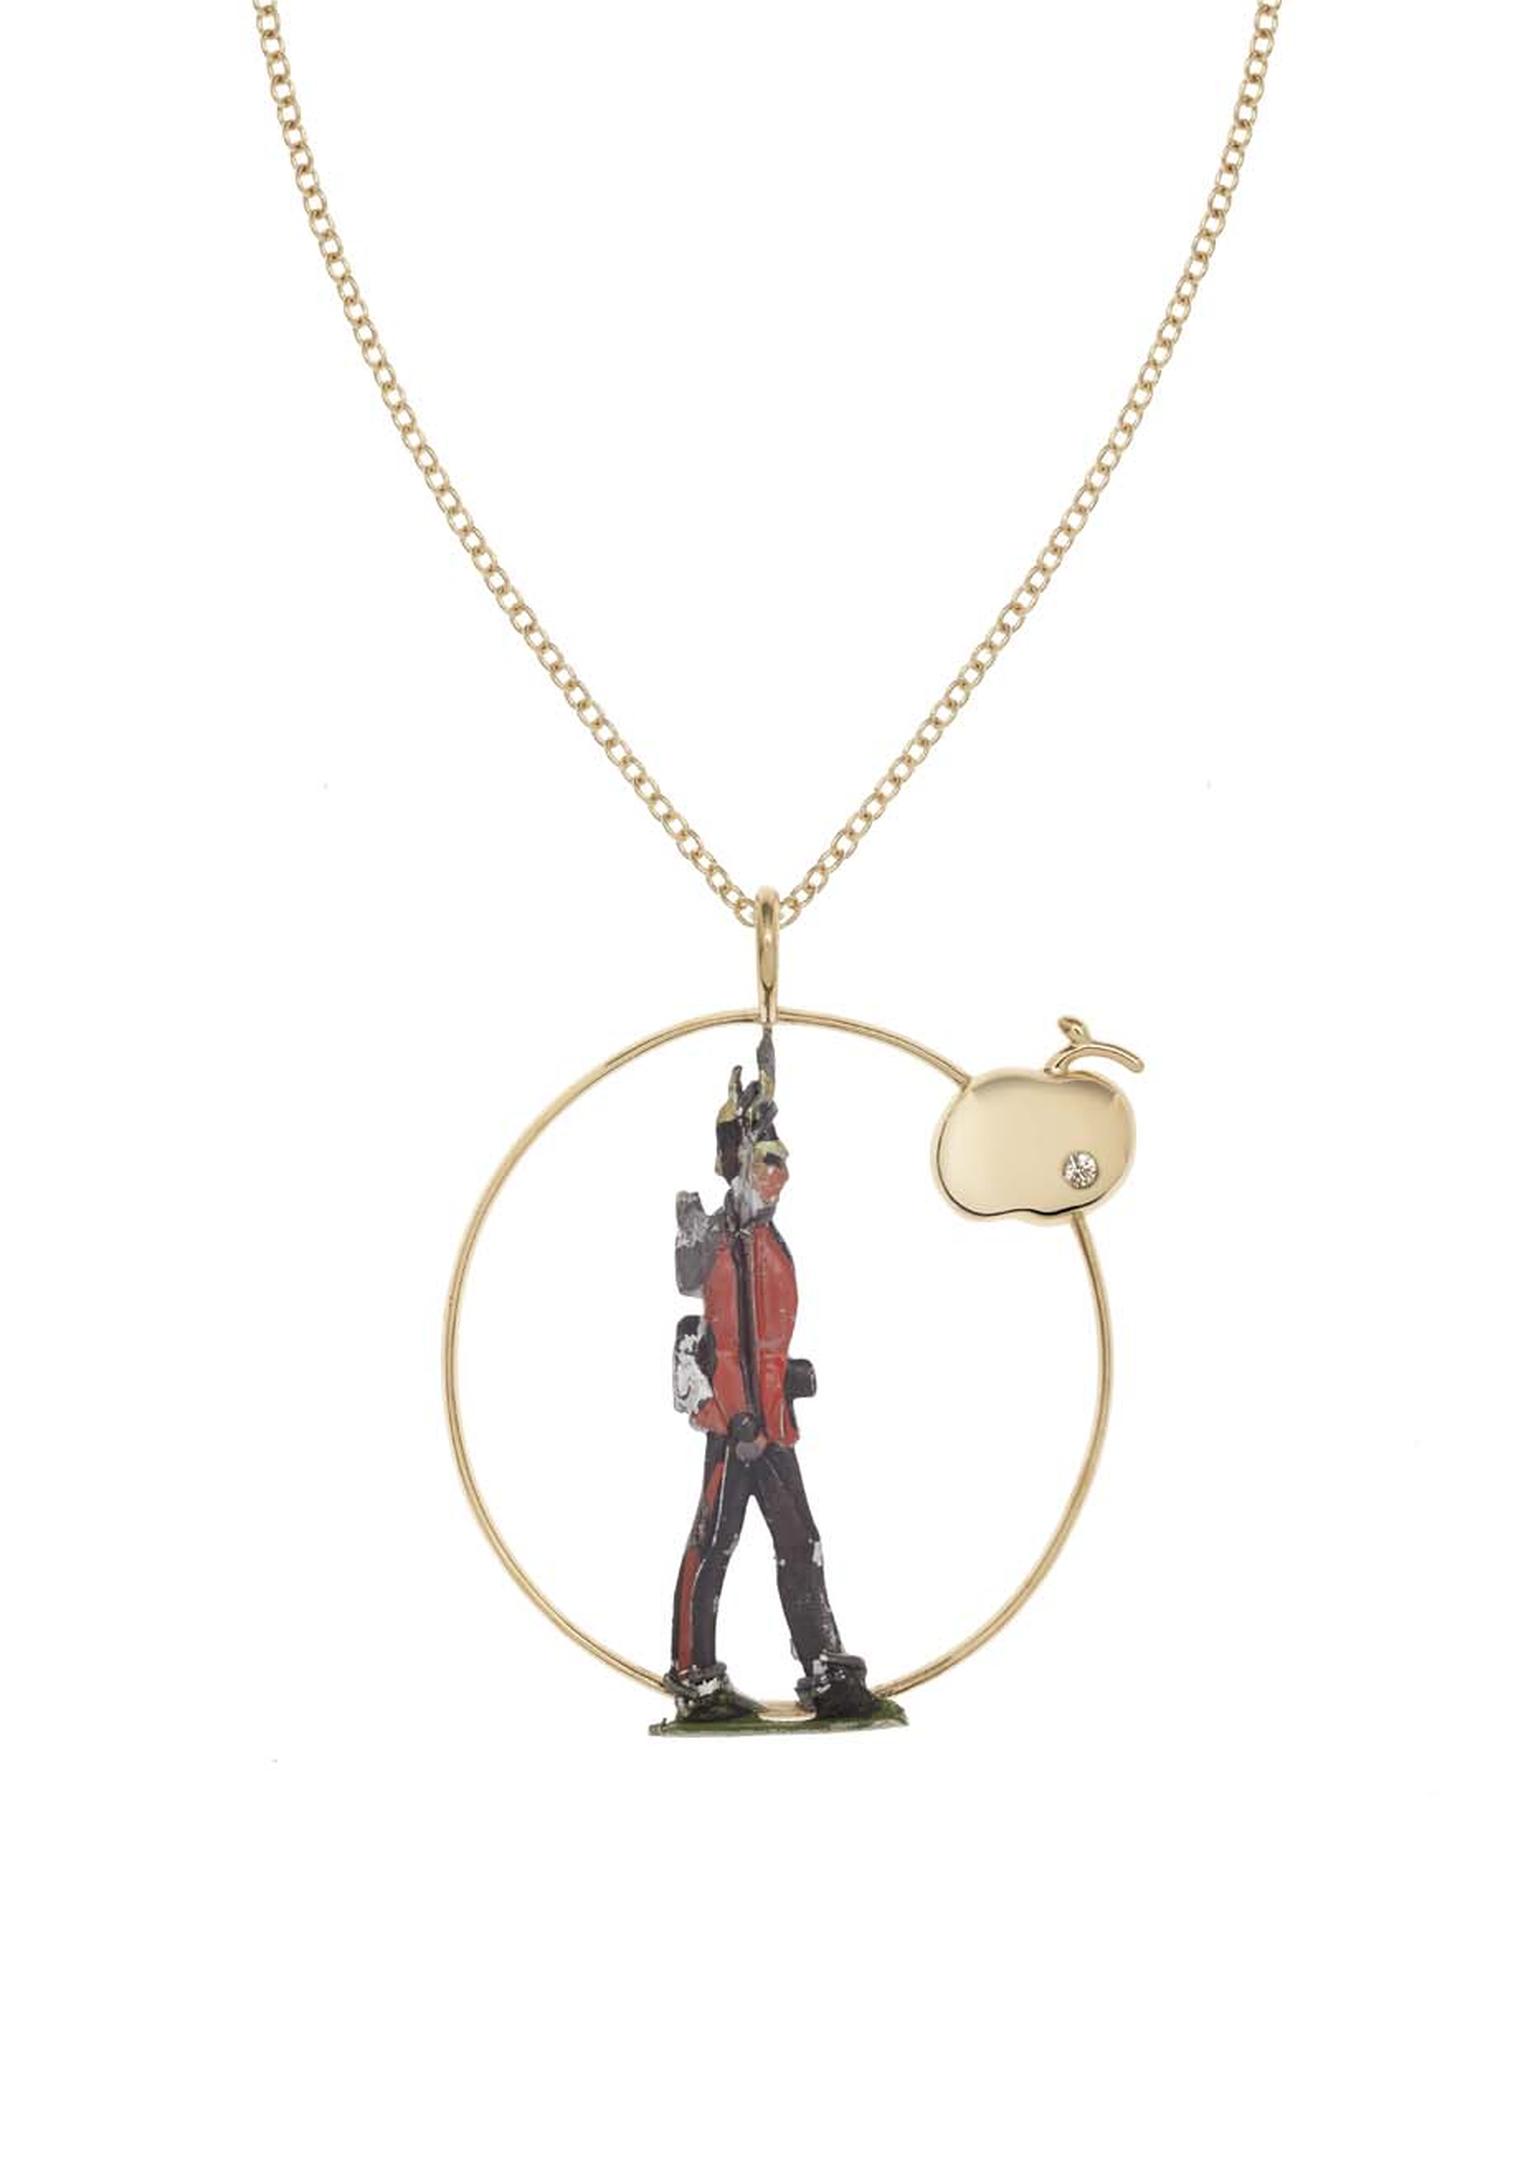 Francesca Villa yellow gold necklace incorporating an antique toy soldier, set with 0.22ct of diamonds.